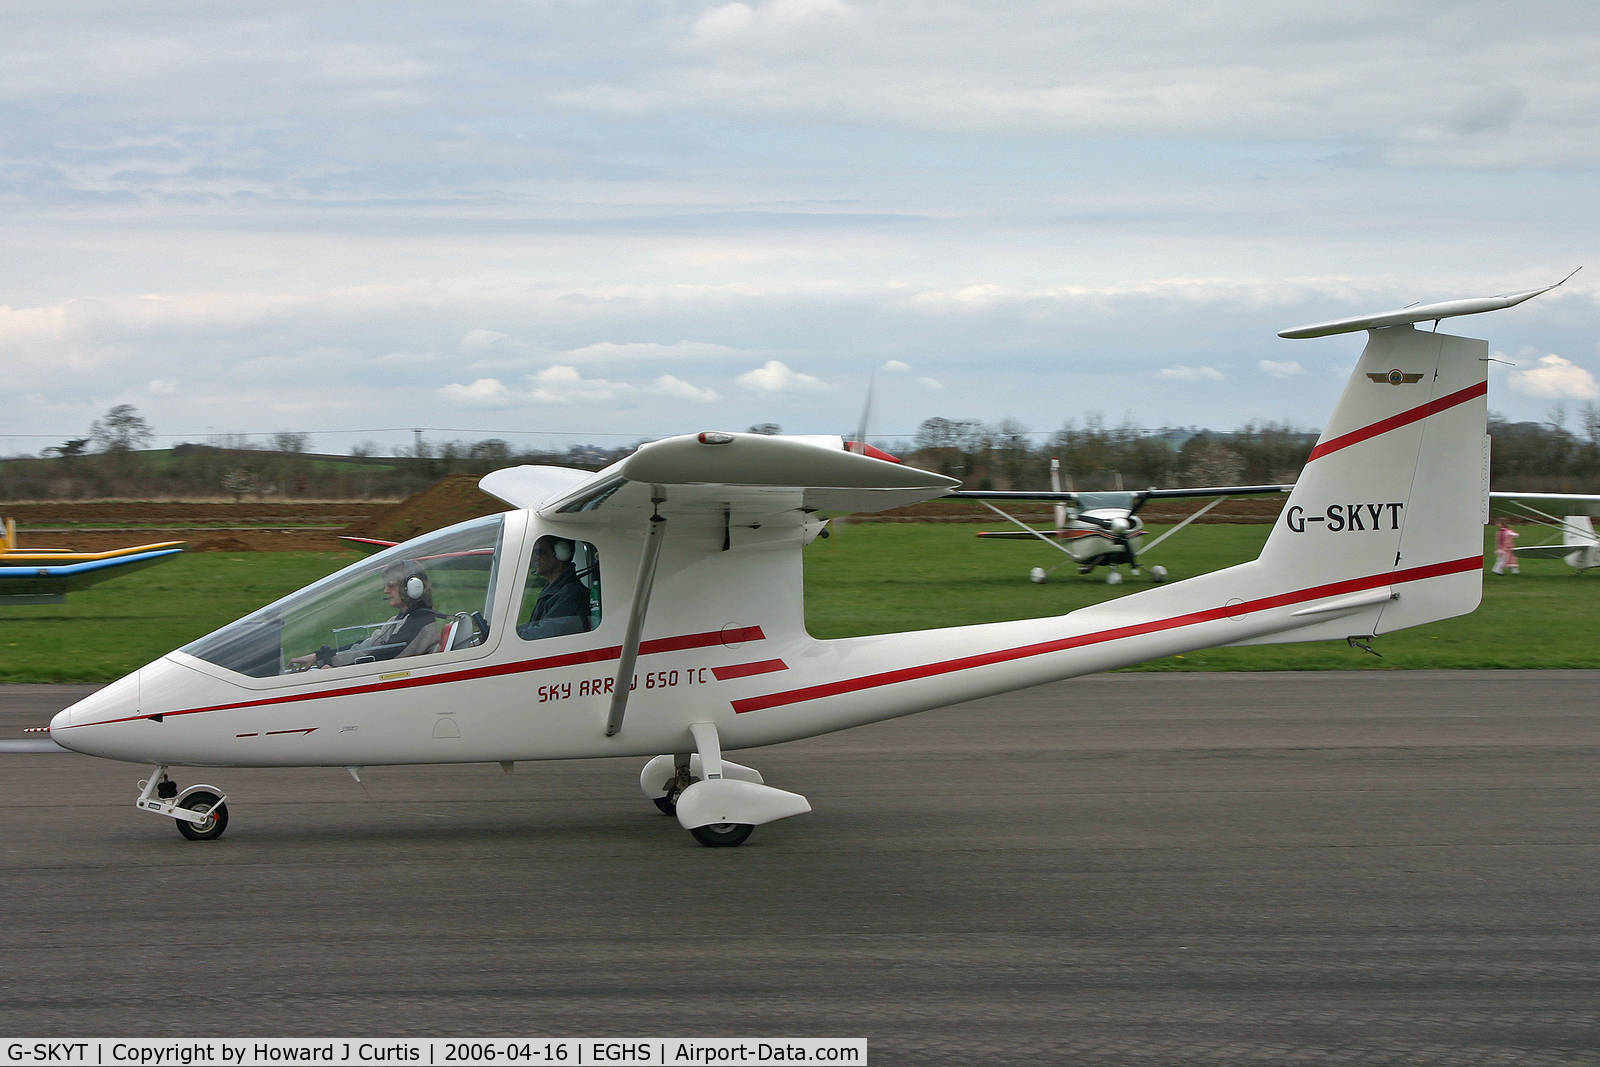 G-SKYT, 1997 Iniziative Industriali Italiane Sky Arrow 650TC III C/N C004, Privately owned, at the PFA fly-in here.